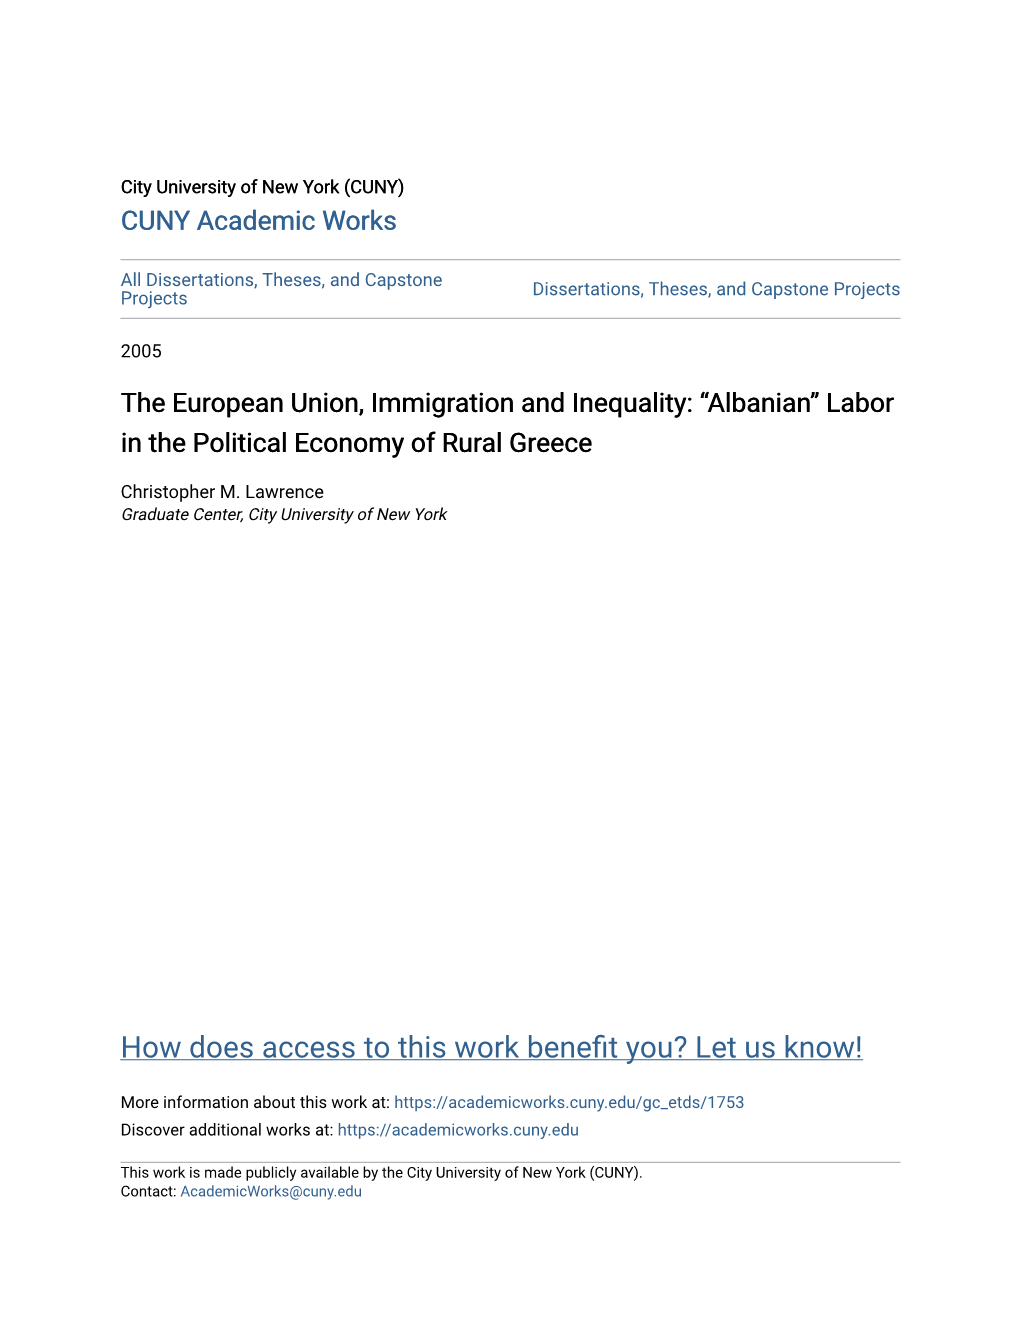 The European Union, Immigration and Inequality: “Albanian” Labor in the Political Economy of Rural Greece